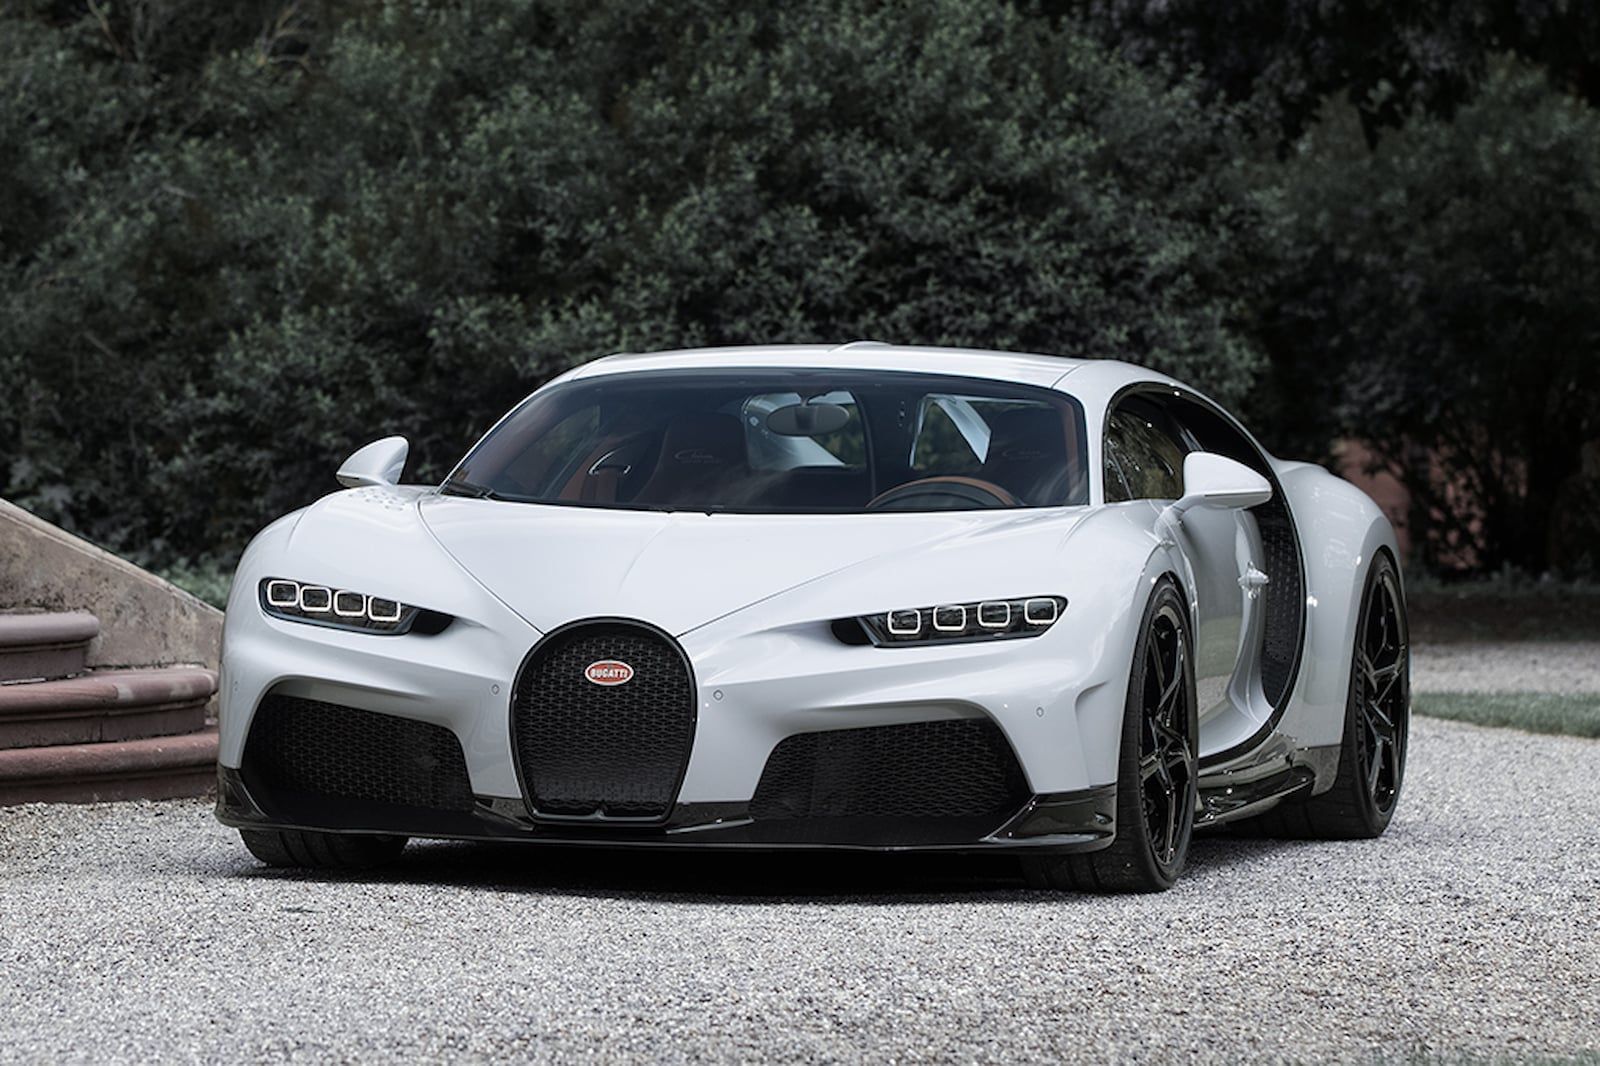 10 Things You Need To Know About The Bugatti Chiron Super Sport